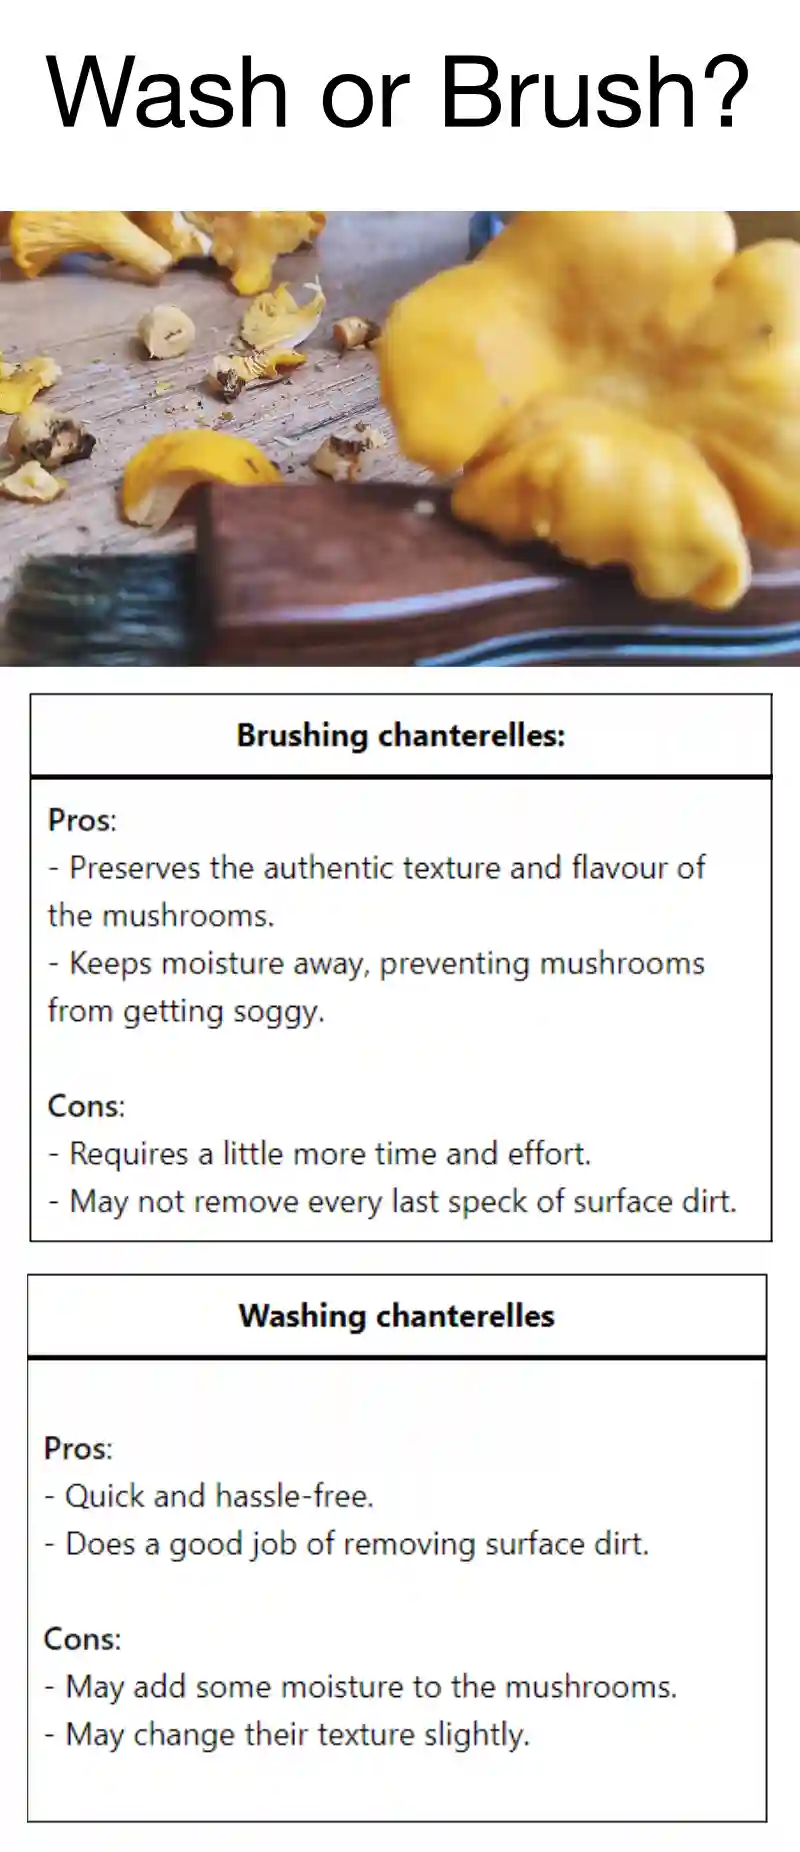 How to clean chanterelles - Wash or Brush 